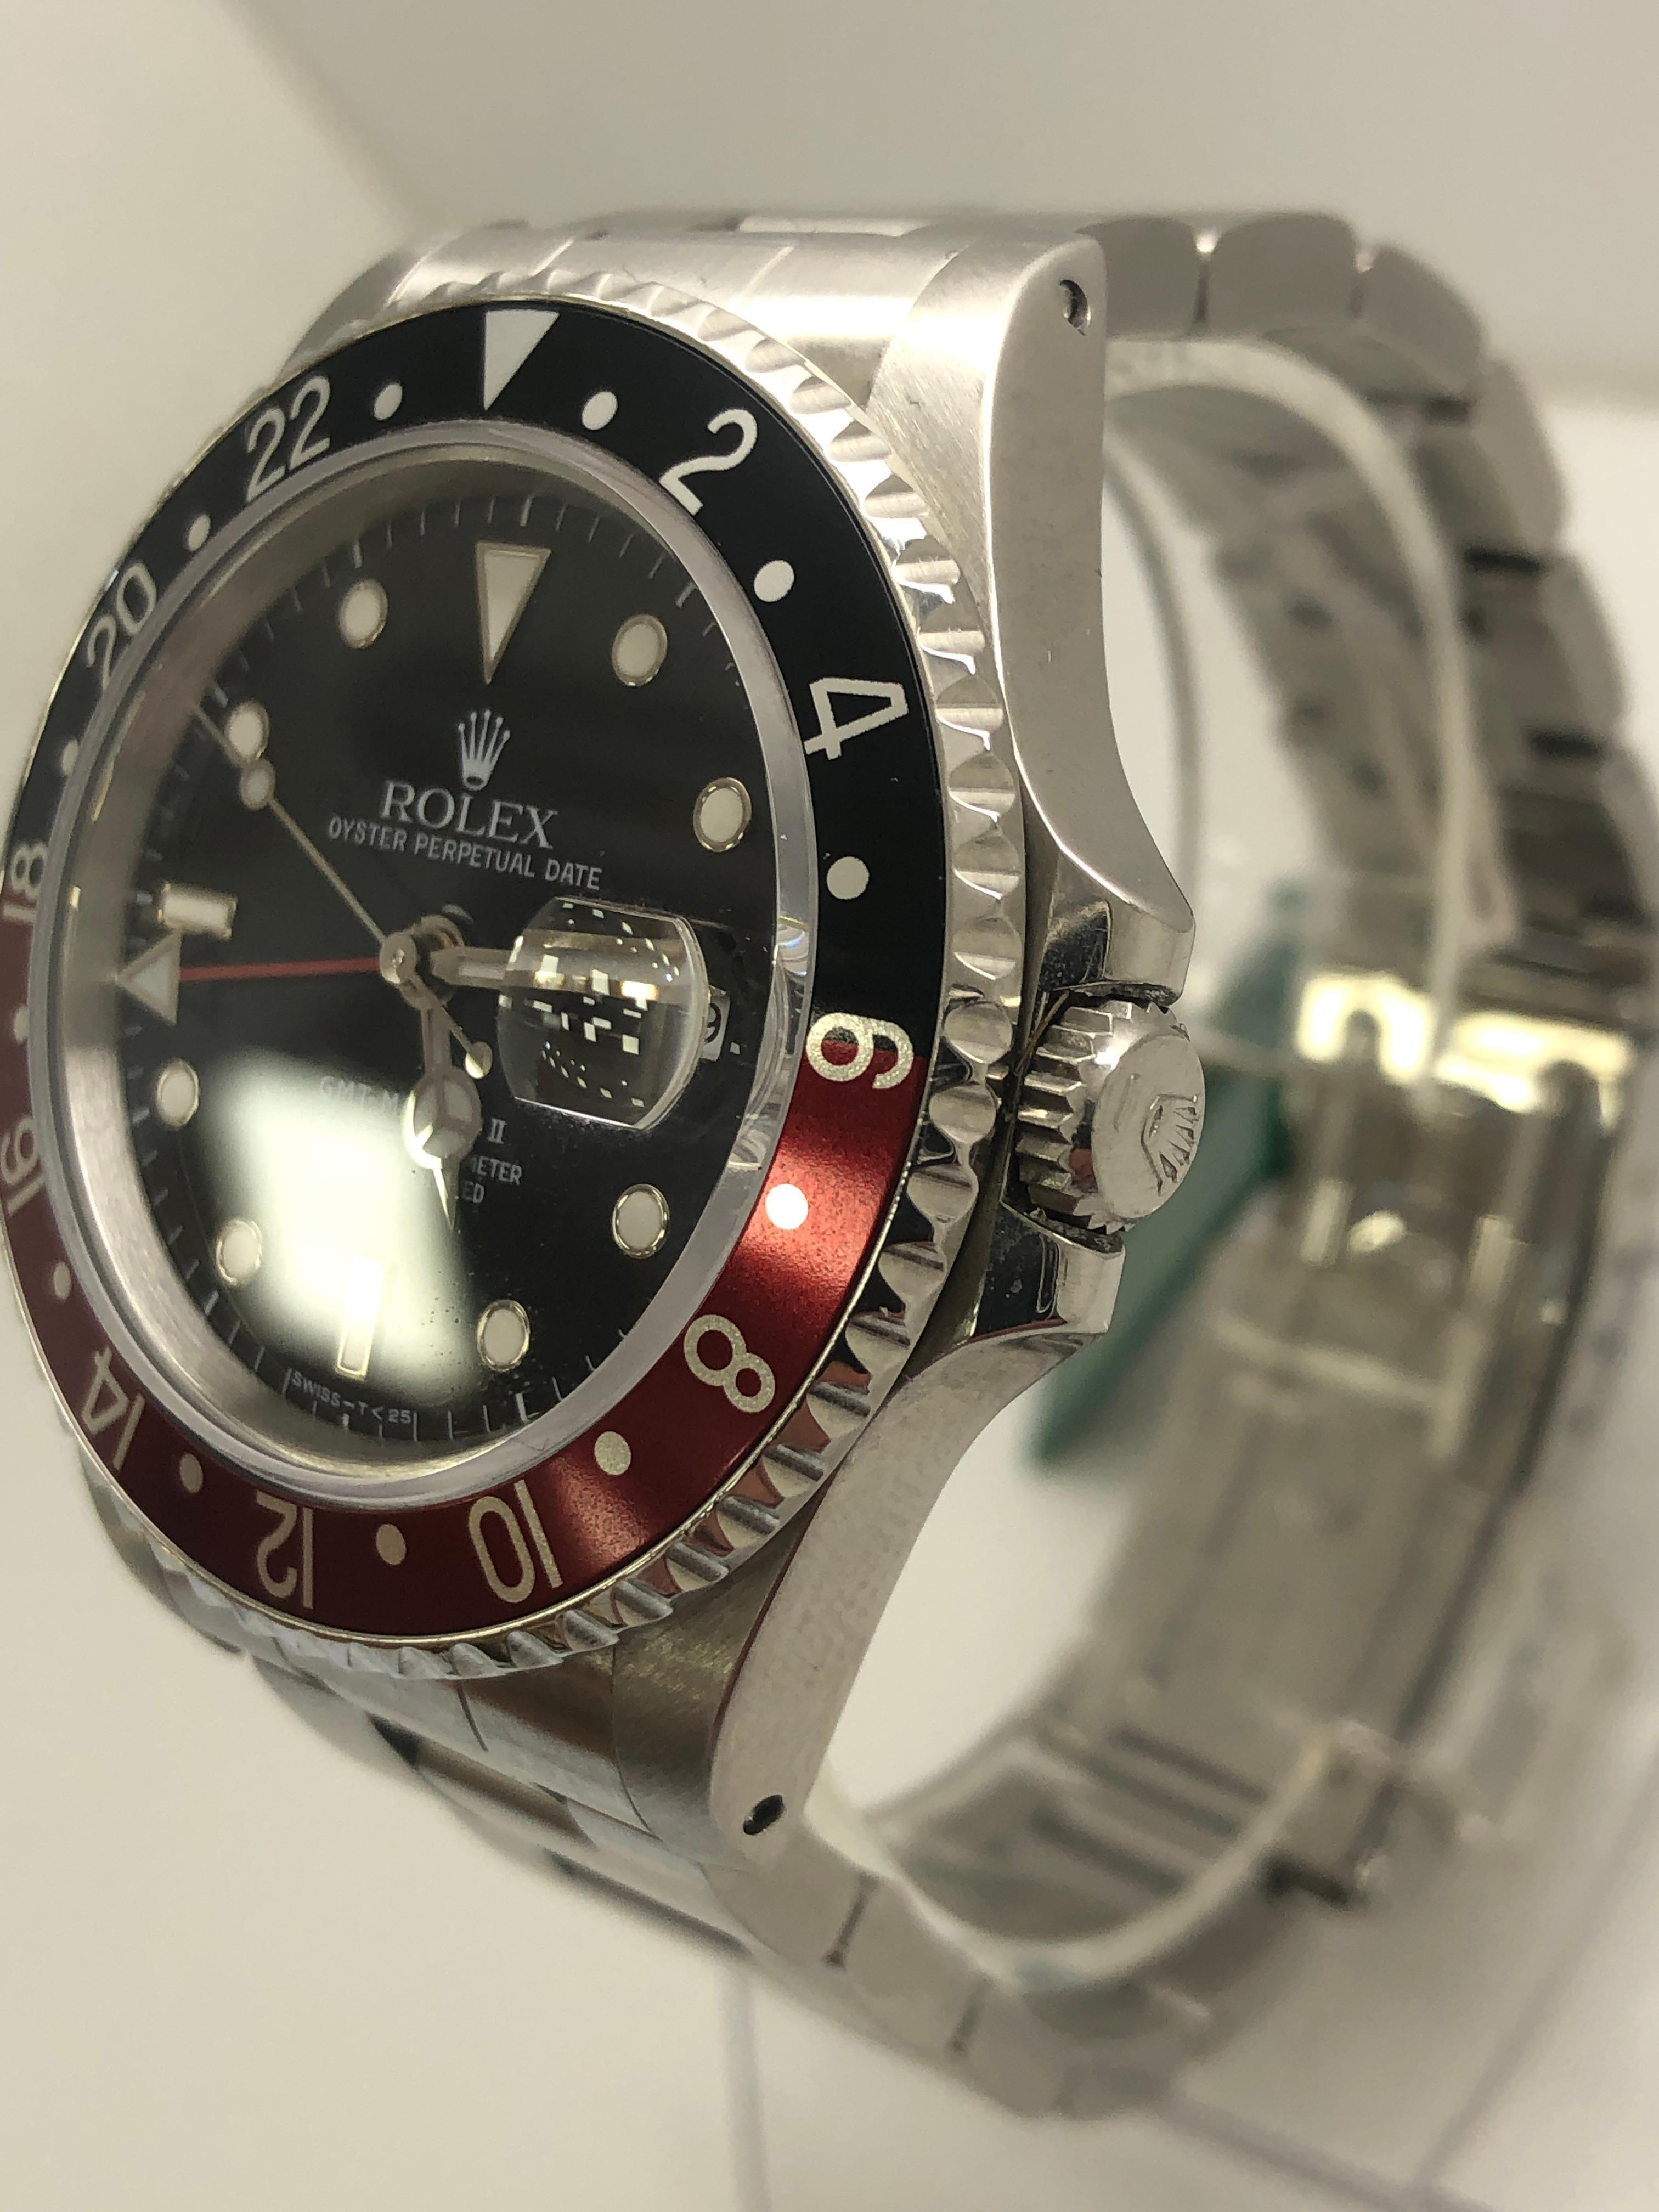 Rolex GMT-Master II Men's Black Watch with Red/Black Bezel - 16710

1990  box and papers included

very good condition

runs perfect

bank wire only  

shop with confidence